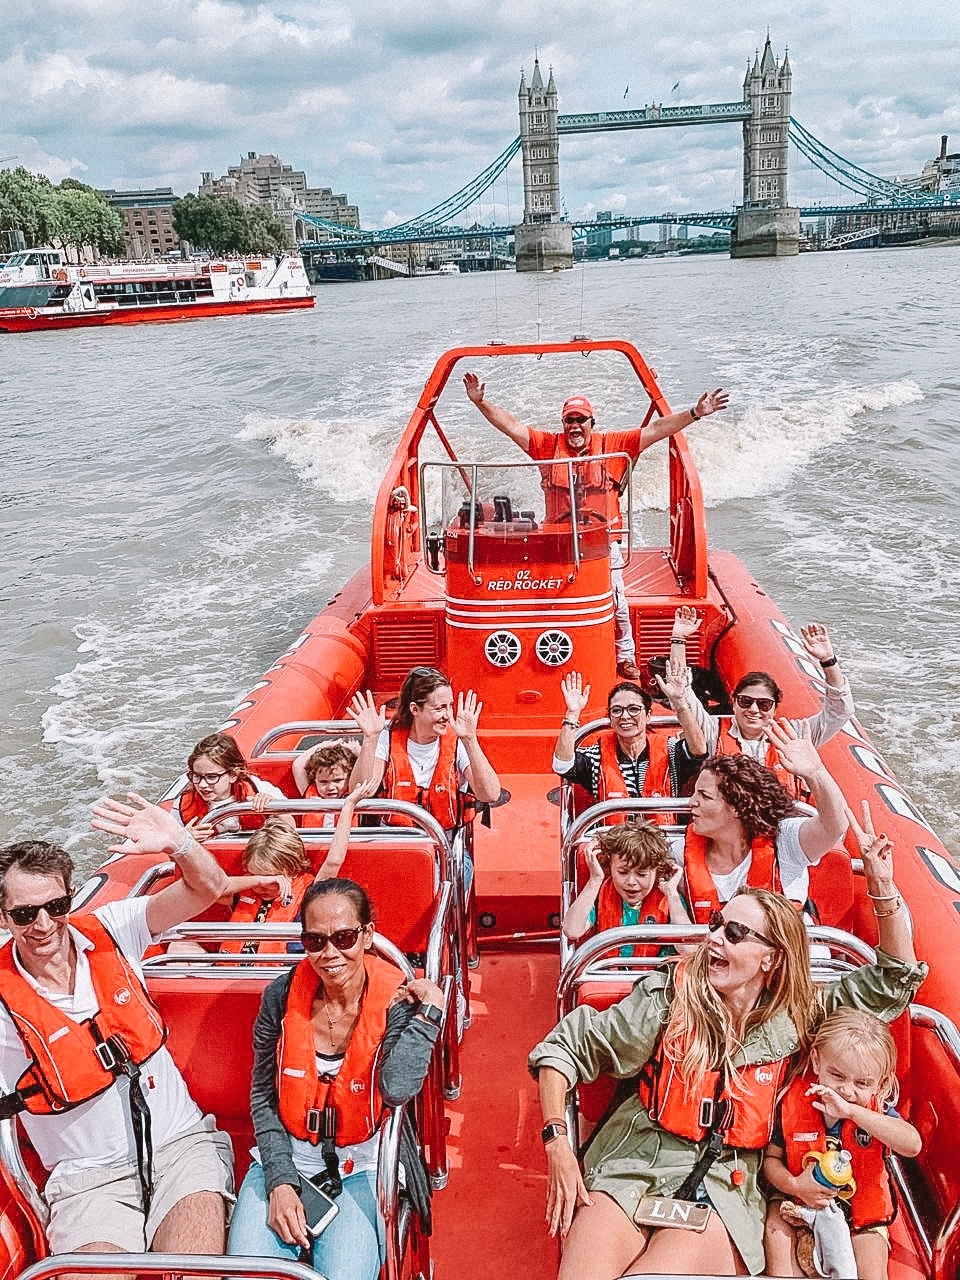 Doing London the Bond way on the child-friendly Thames Rocket